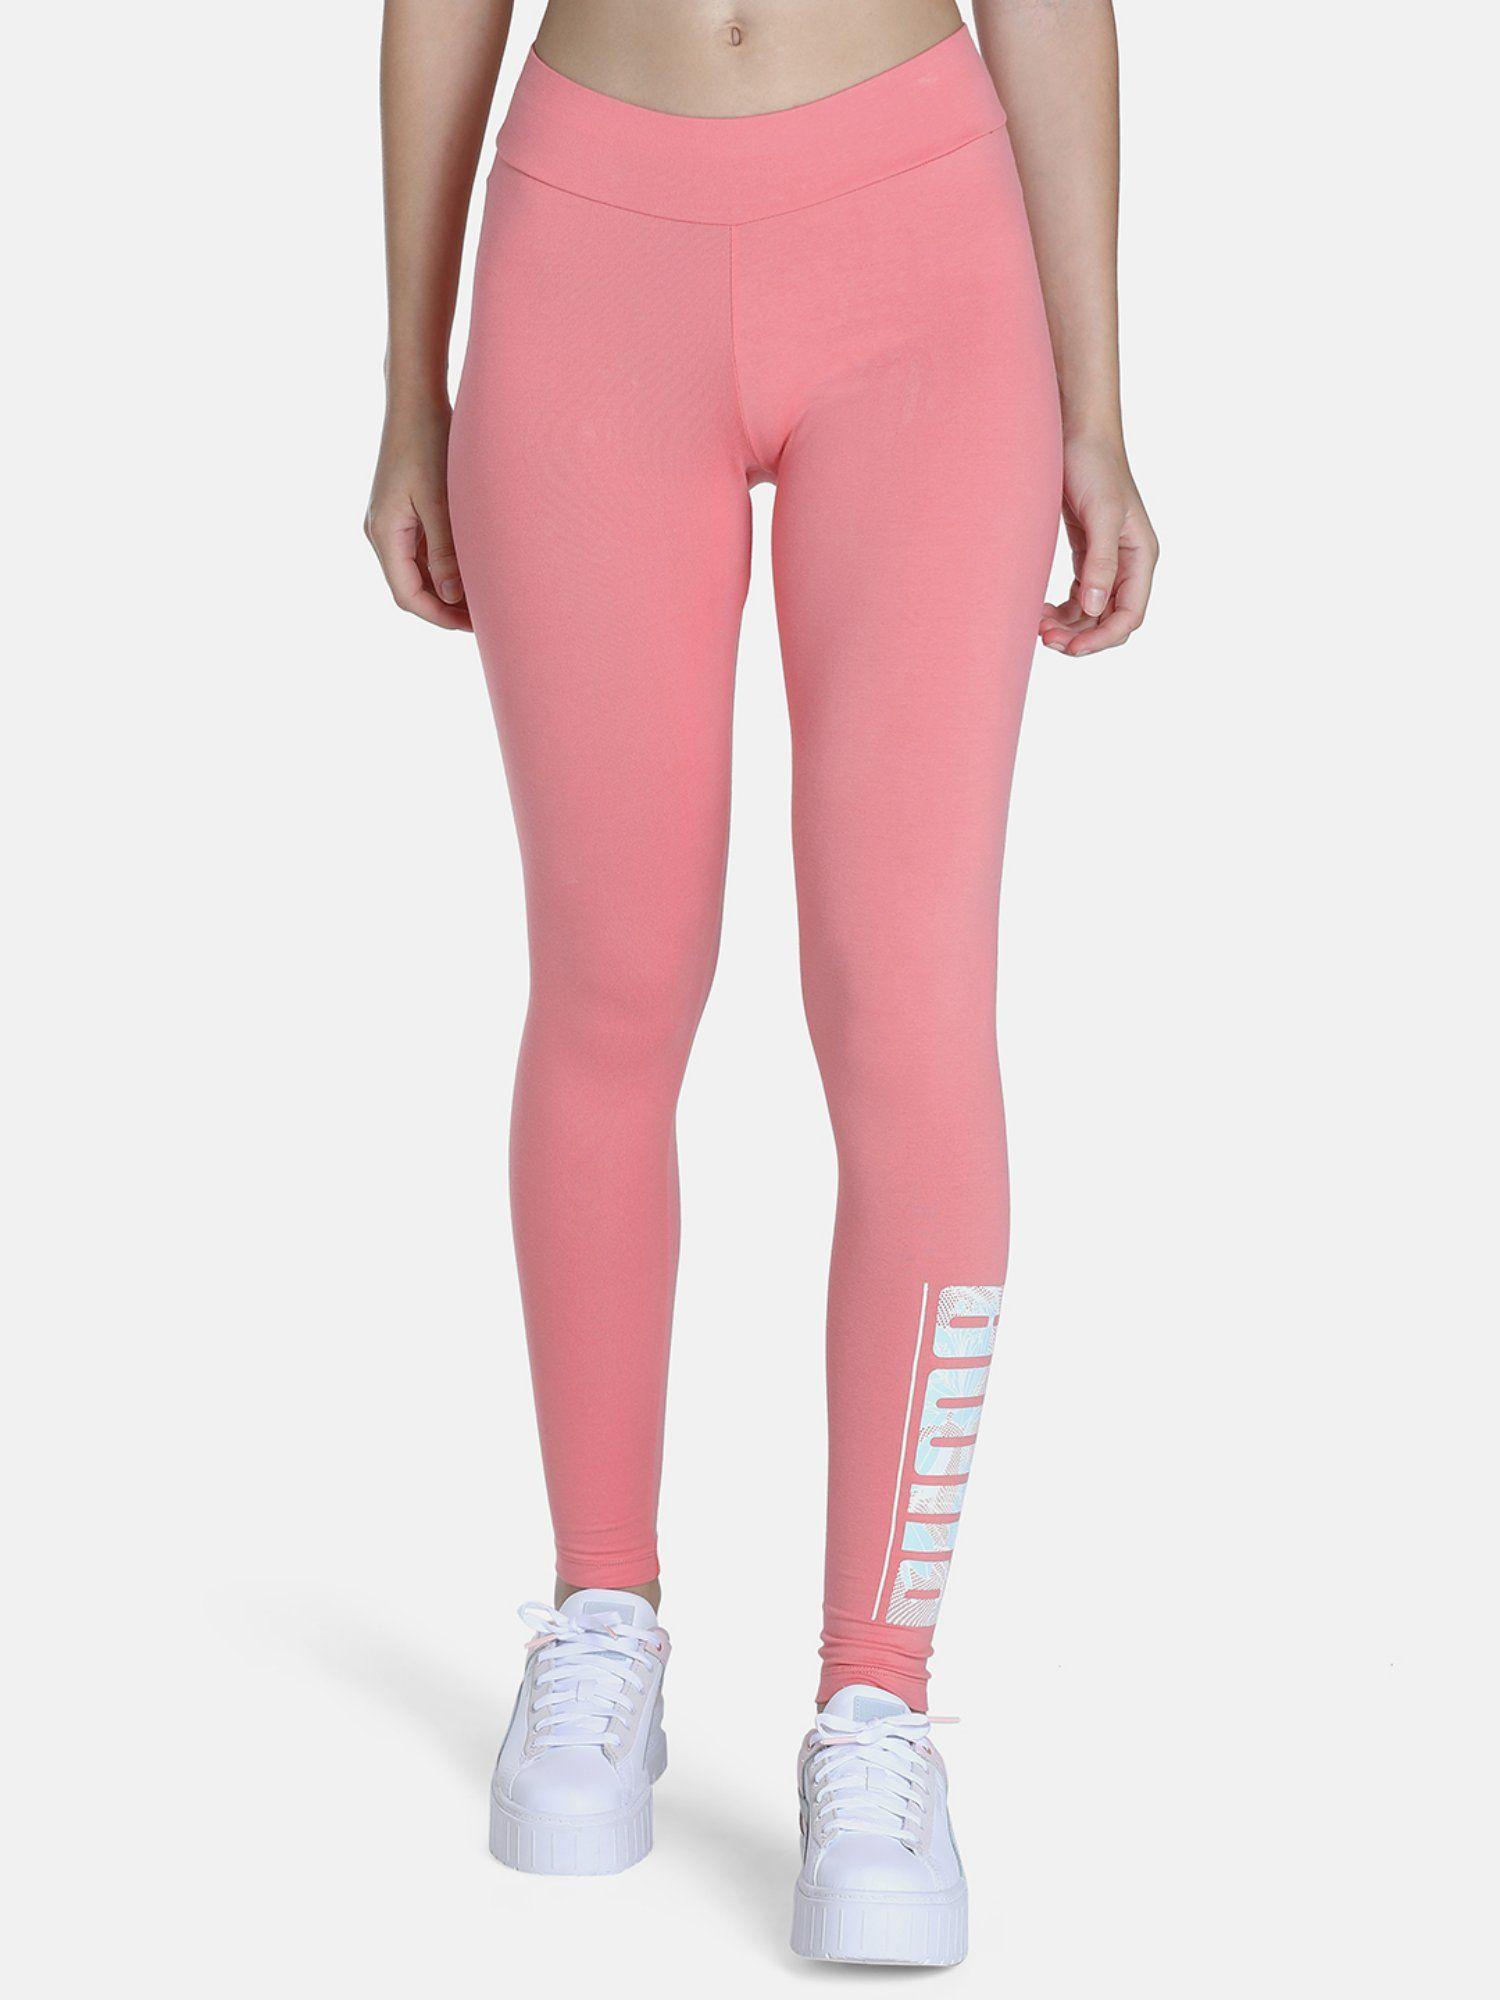 graphic womens pink tights